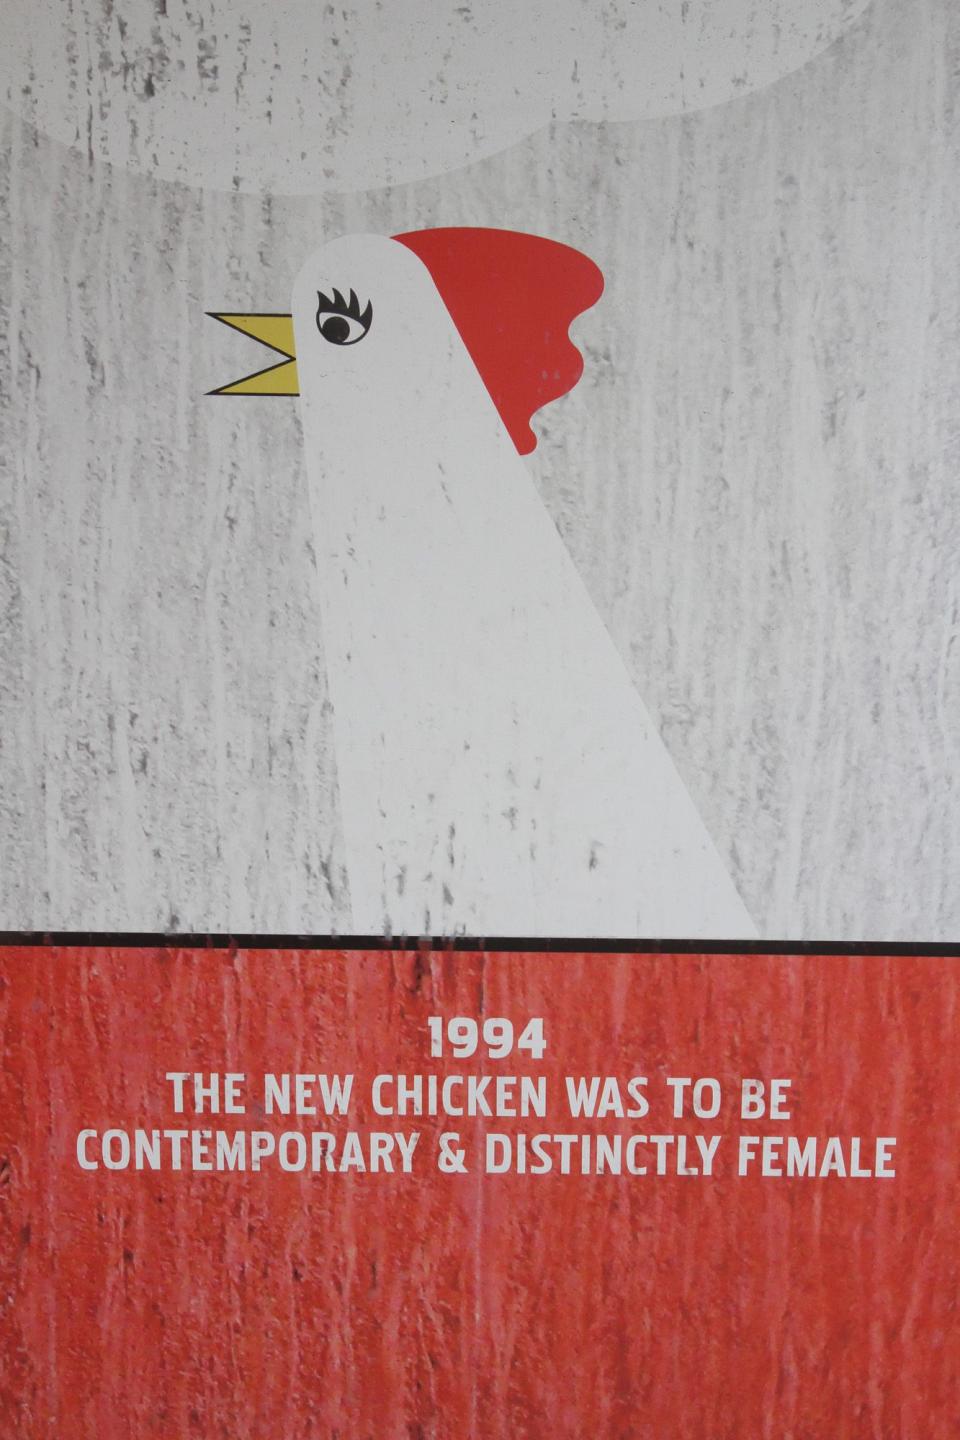 During the rebuild, there was talk that the new chicken would be contemporary and distinctively female. That didn't fly.